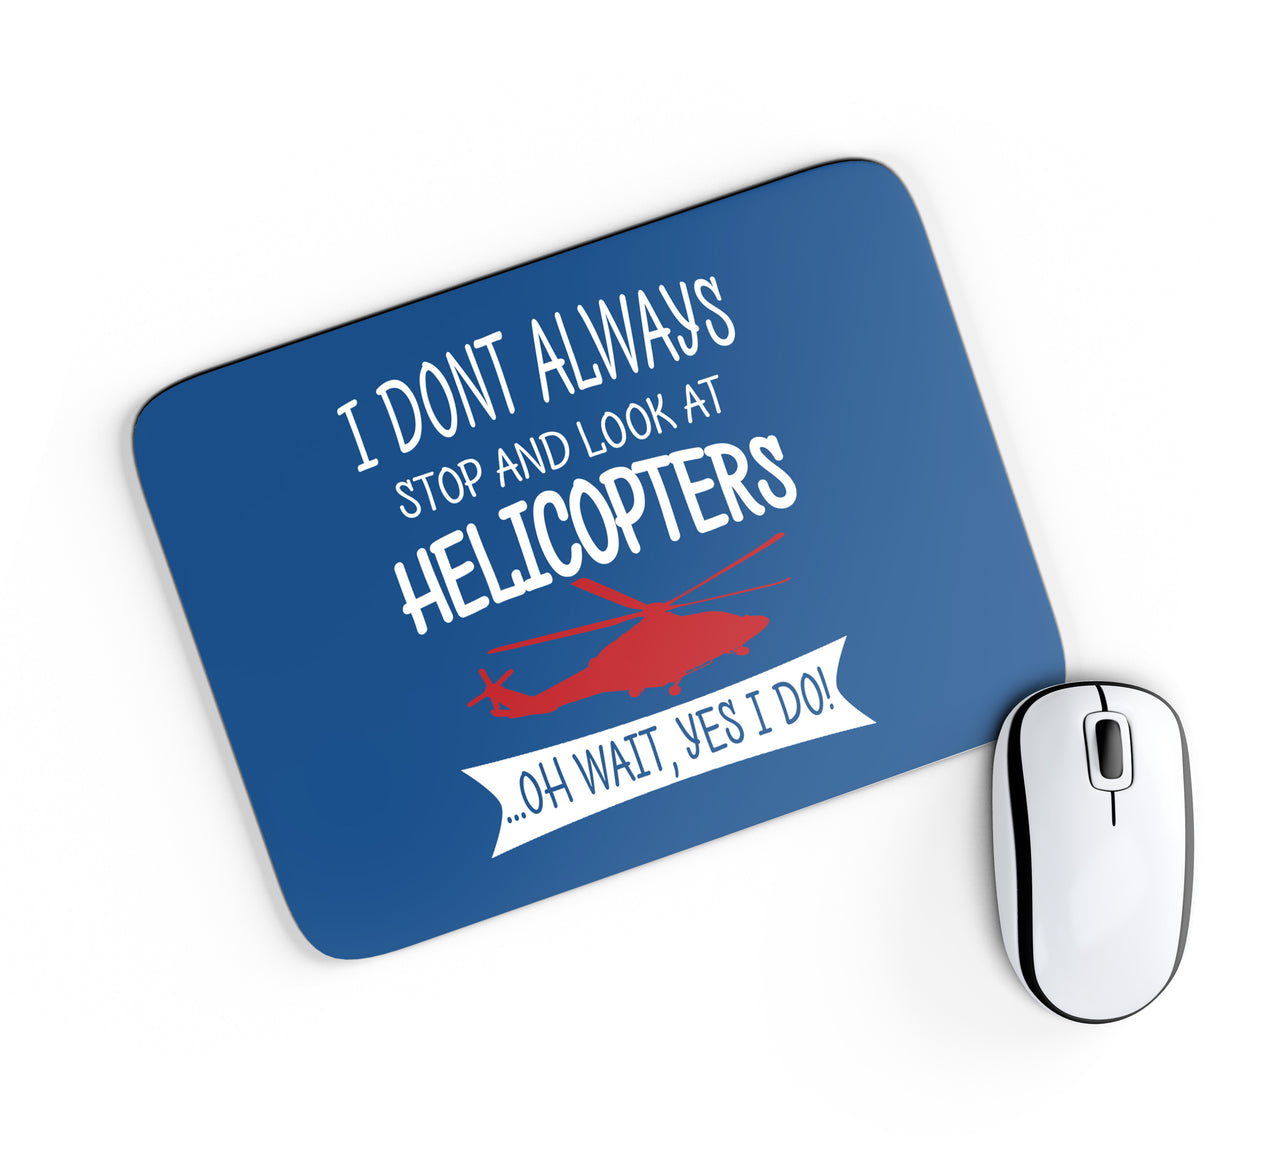 I Don't Always Stop and Look at Helicopters Designed Mouse Pads